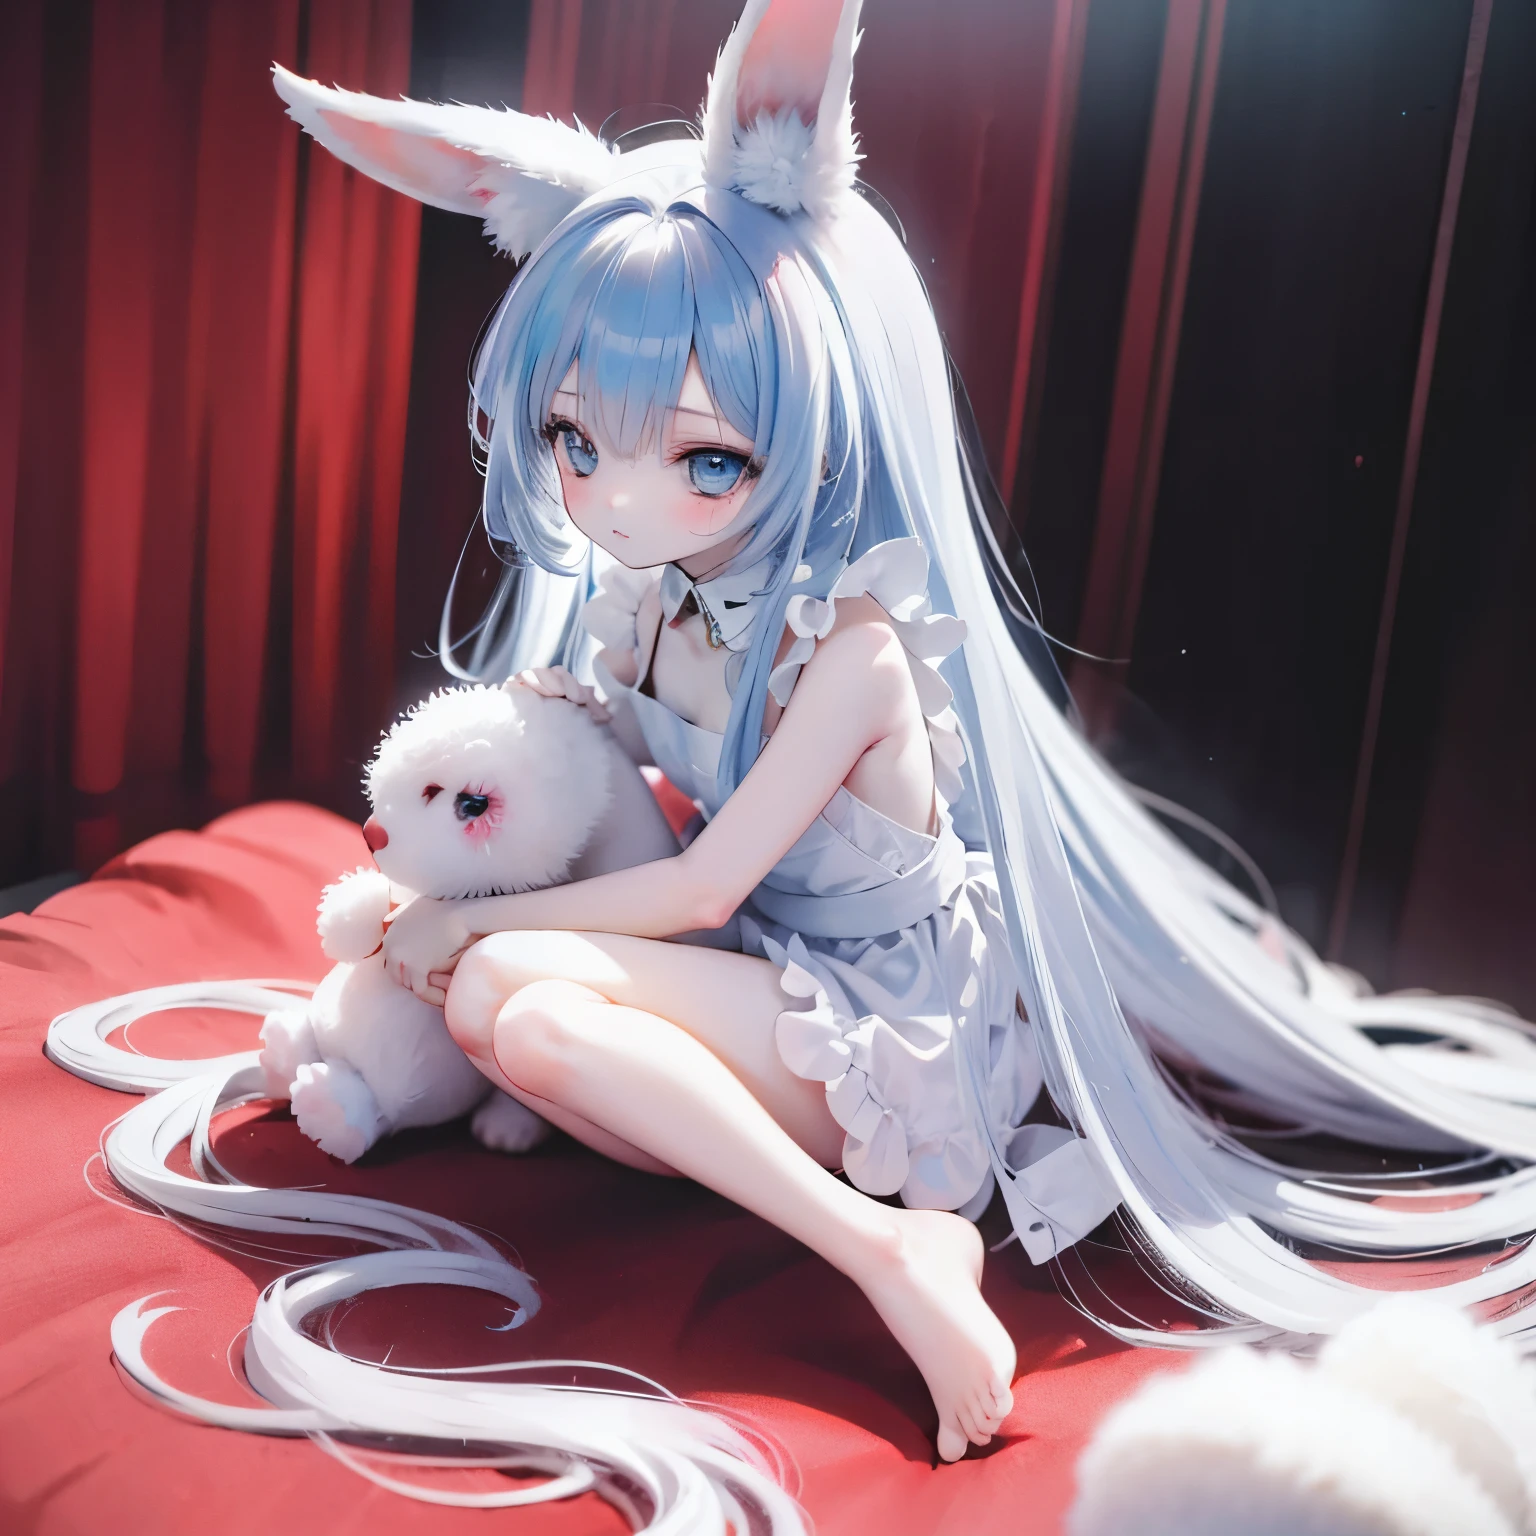 Anime Sitting Nude - Anime girl with long blue hair sitting on a bed holding a white dog -  SeaArt AI